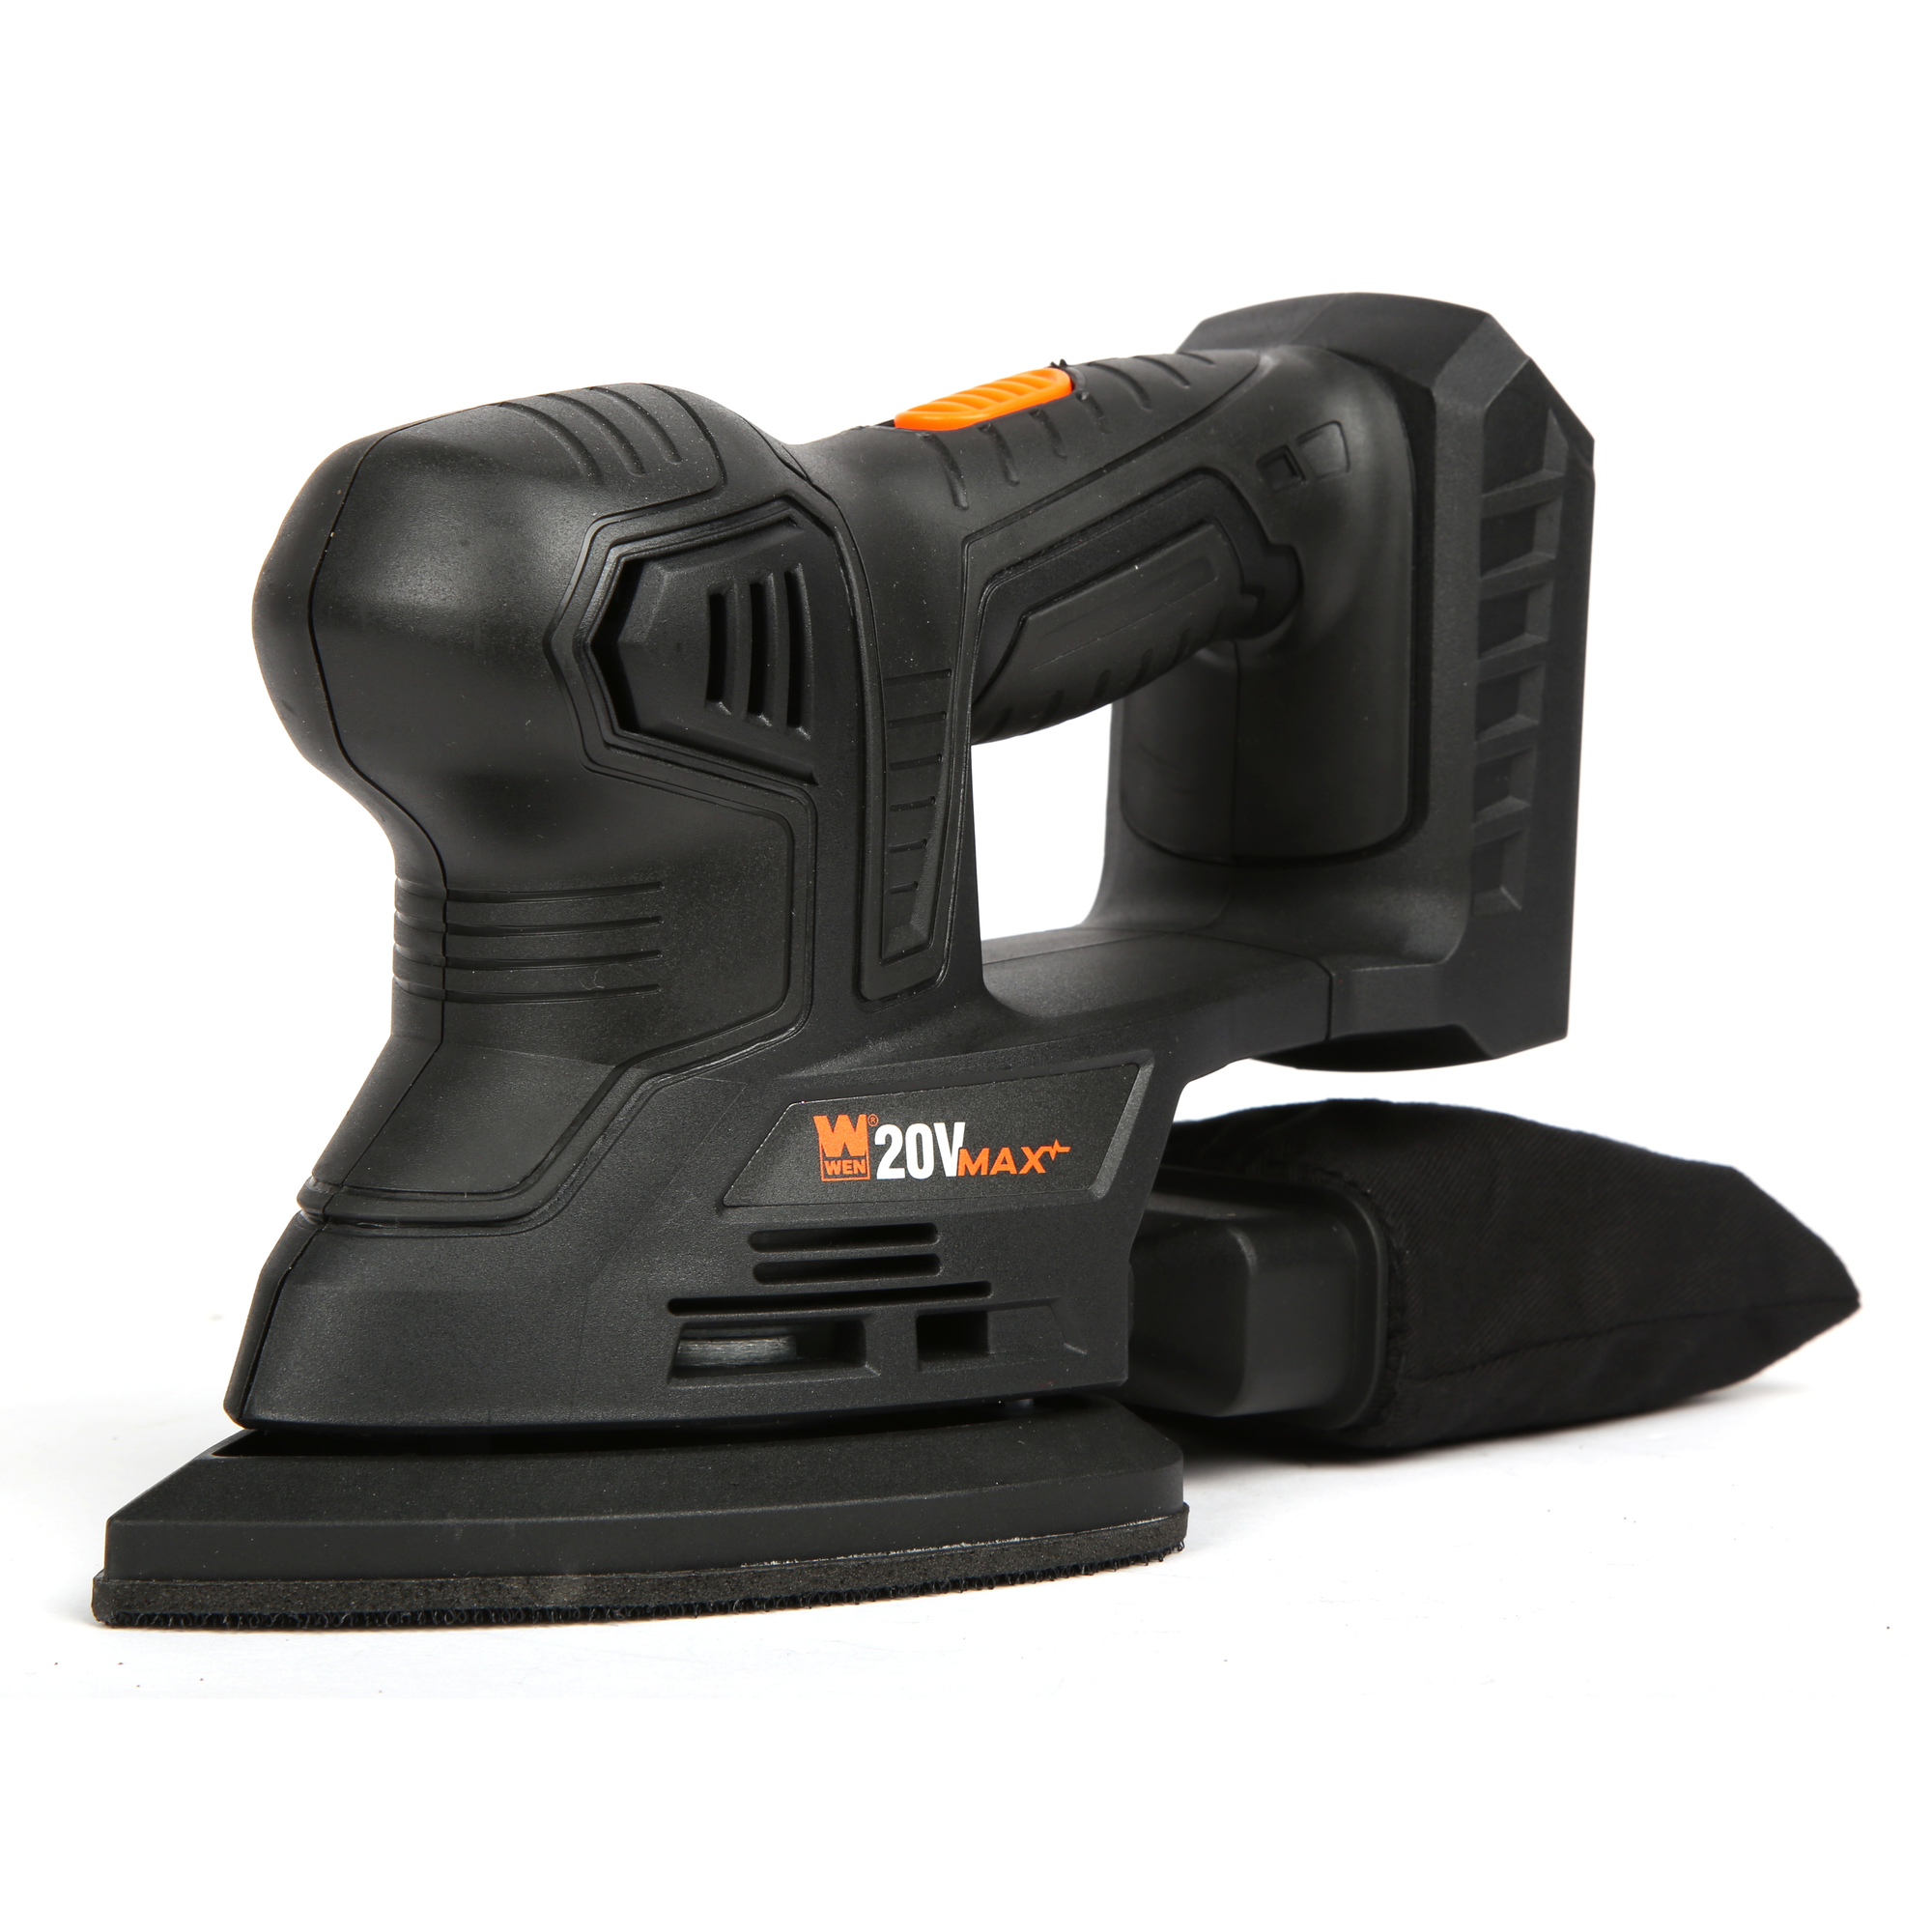 WEN, 20V Max Cordless Detailing Palm Sander (Tool Only), Max. Speed 12000 OPM, Model 20401BT